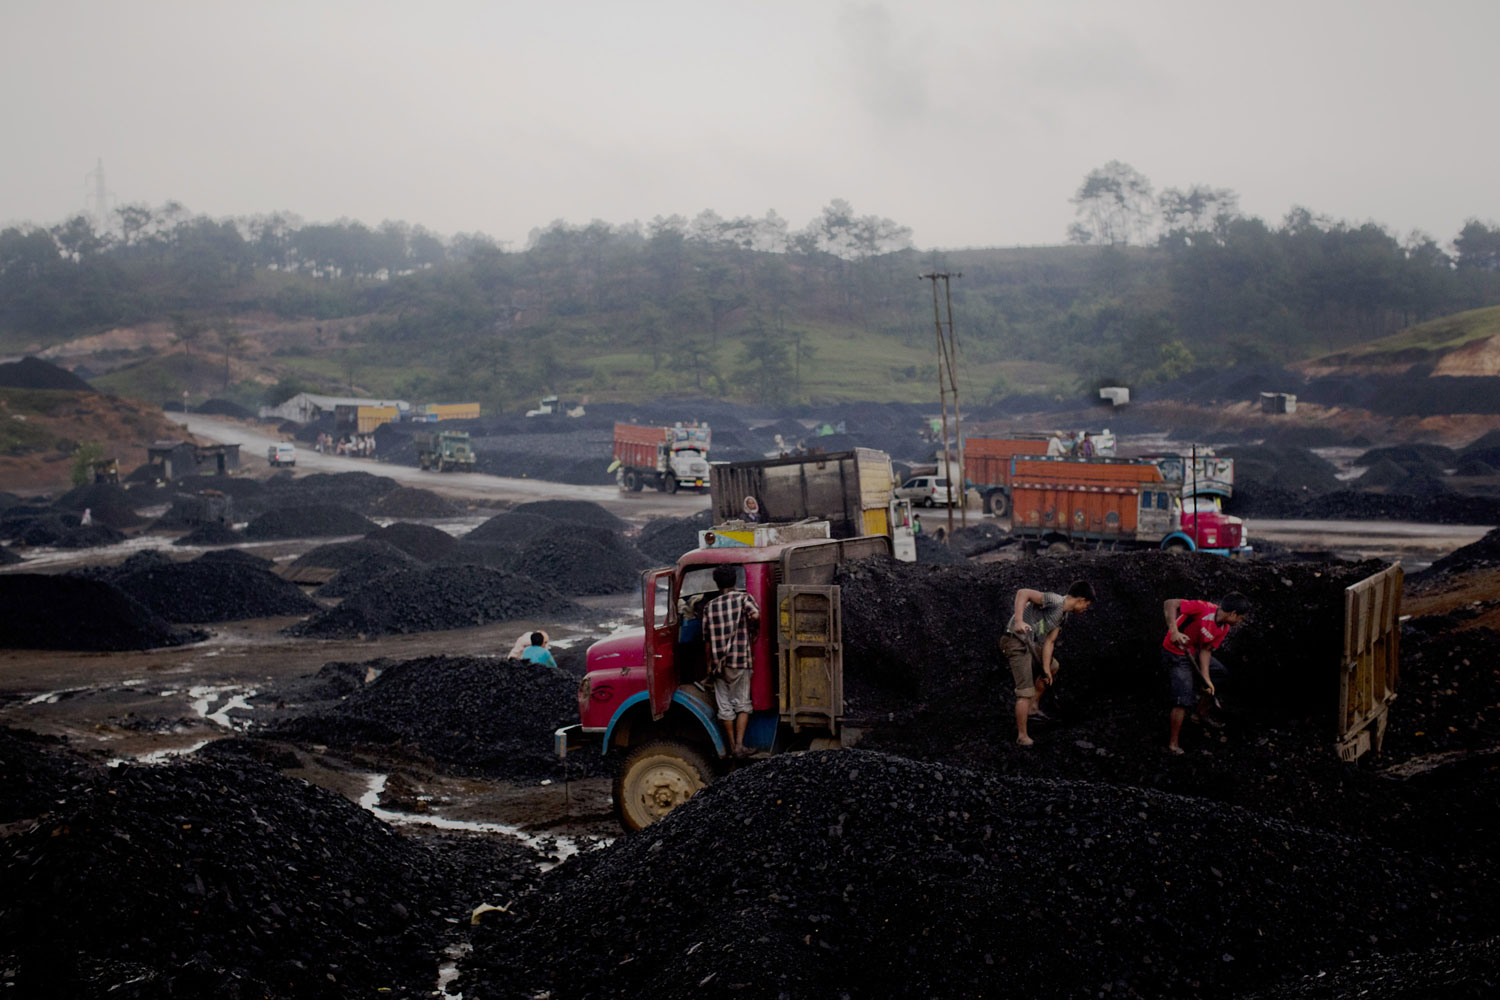 Workers load coal onto trucks at a coal depot. After traversing treacherous mountain roads, the coal is delivered to neighbouring Bangladesh and to Assam from where it is distributed all over India, to be used primarily for power generation and as a source of fuel in cement plants.